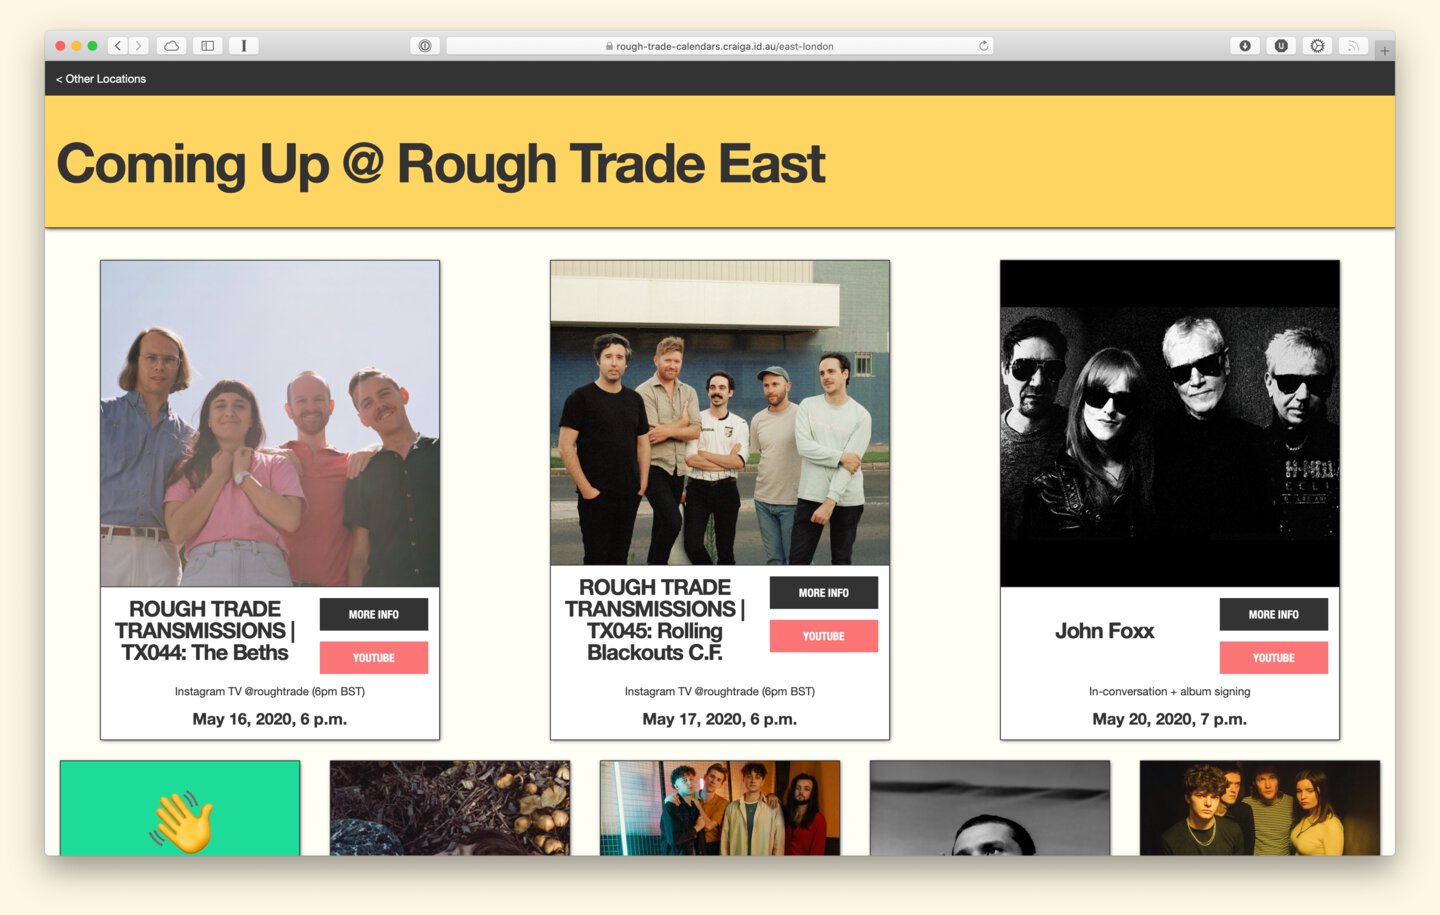 list of events on the Rough Trade Calendars web site